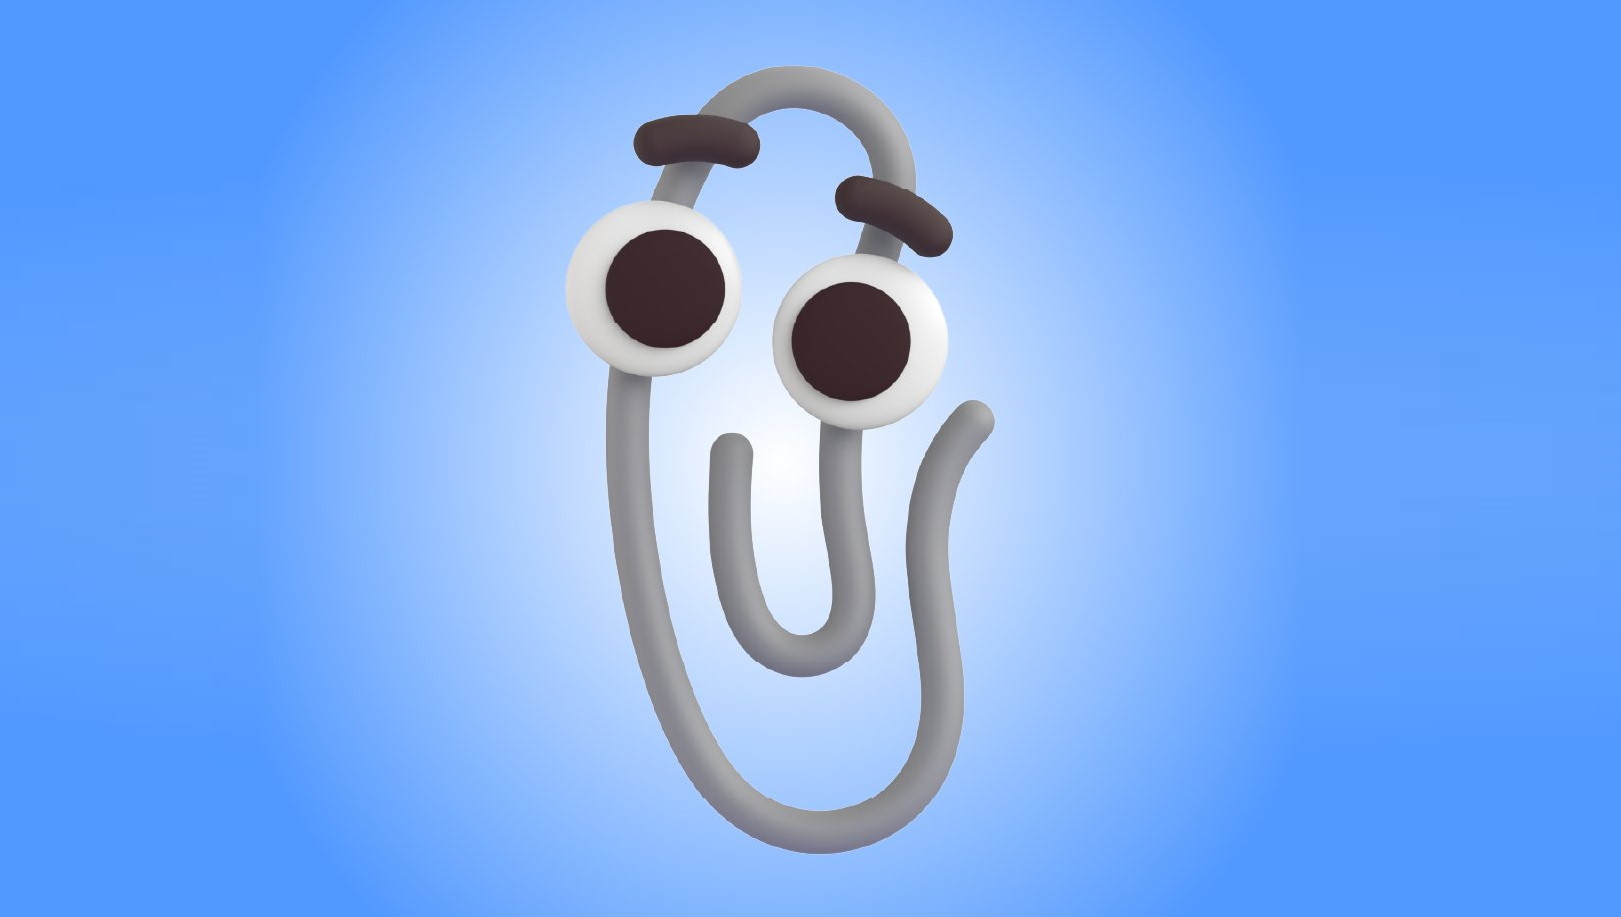  Microsoft threatens to bring back Clippy 